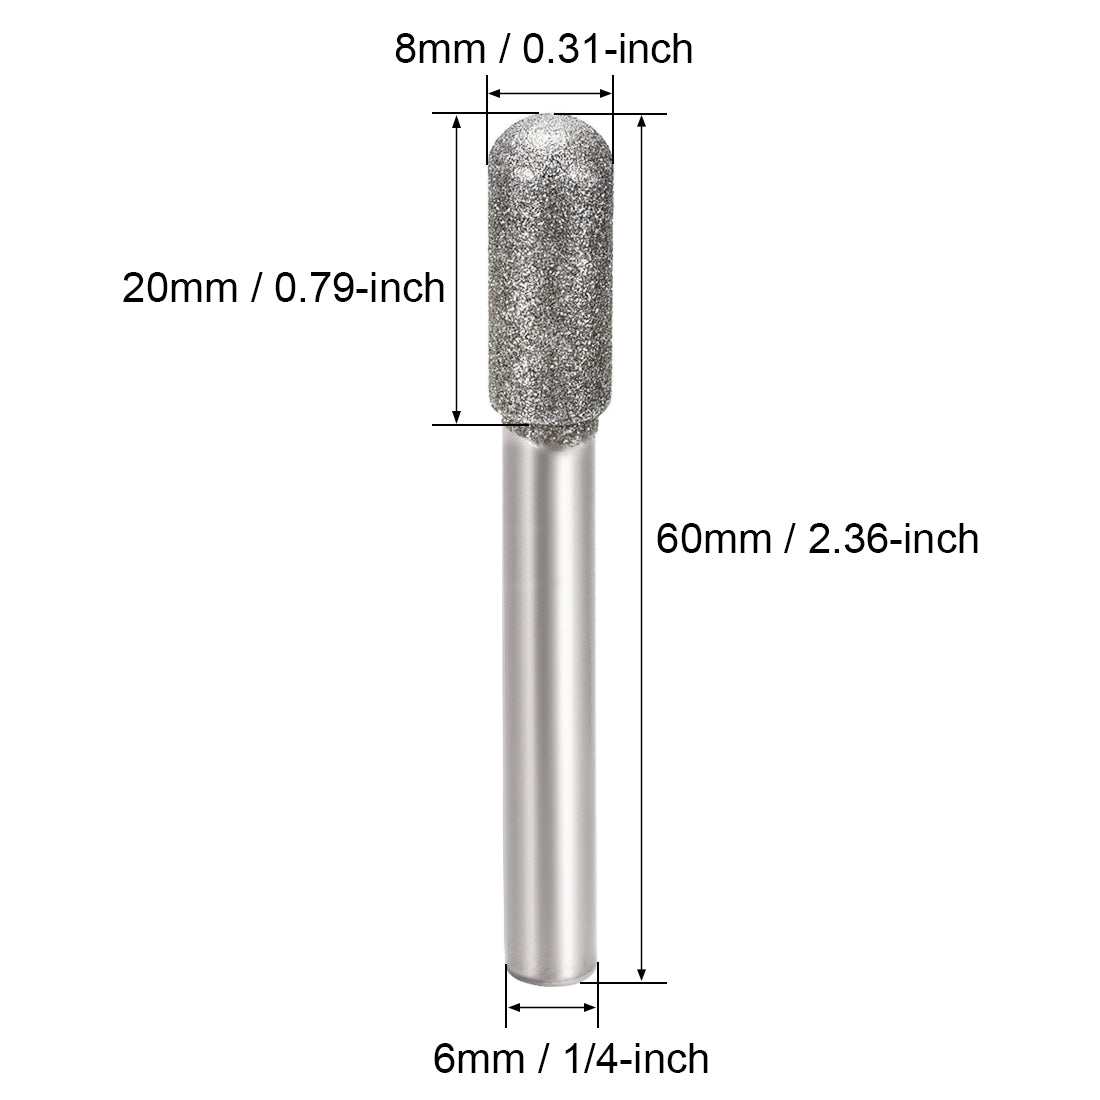 Uxcell Uxcell Diamond Burrs Grinding Drill Bits for Carving Rotary Tool 1/4-Inch Shank 6mm Cylindrical Ball Nose 120 Grit 2 Pcs